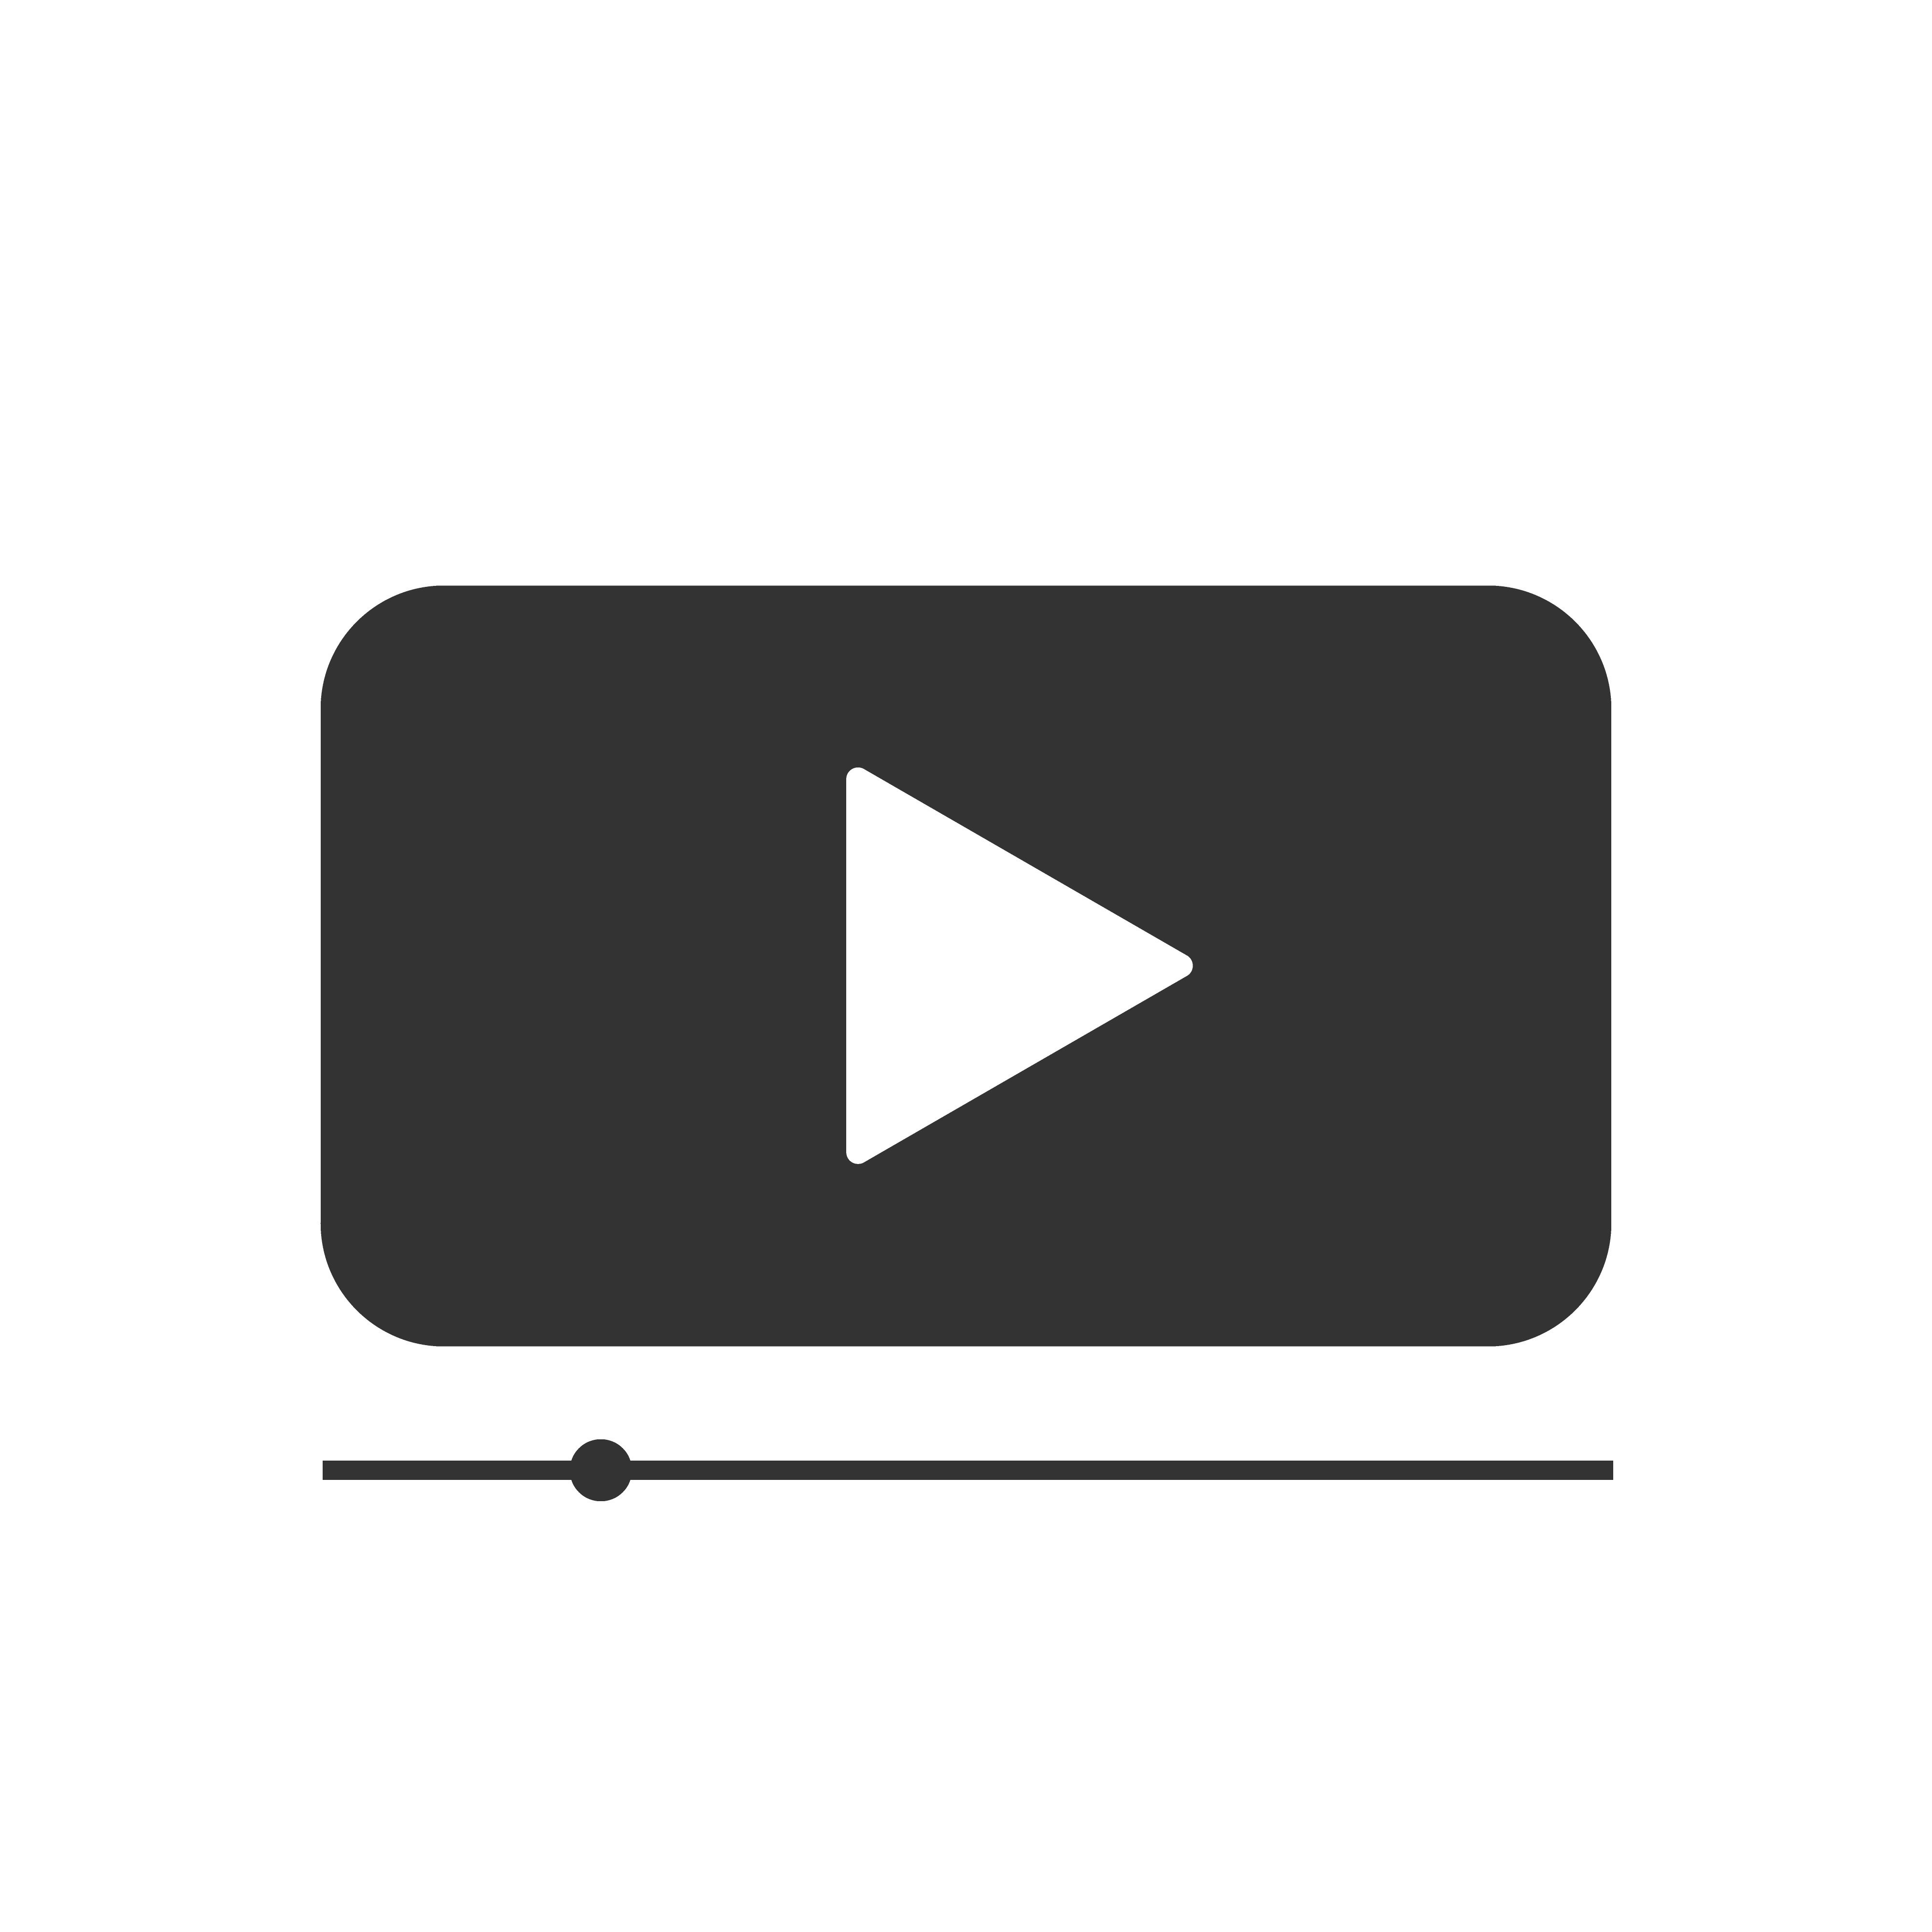 Video player vector icon on white background. Video player vector icon Template for your design